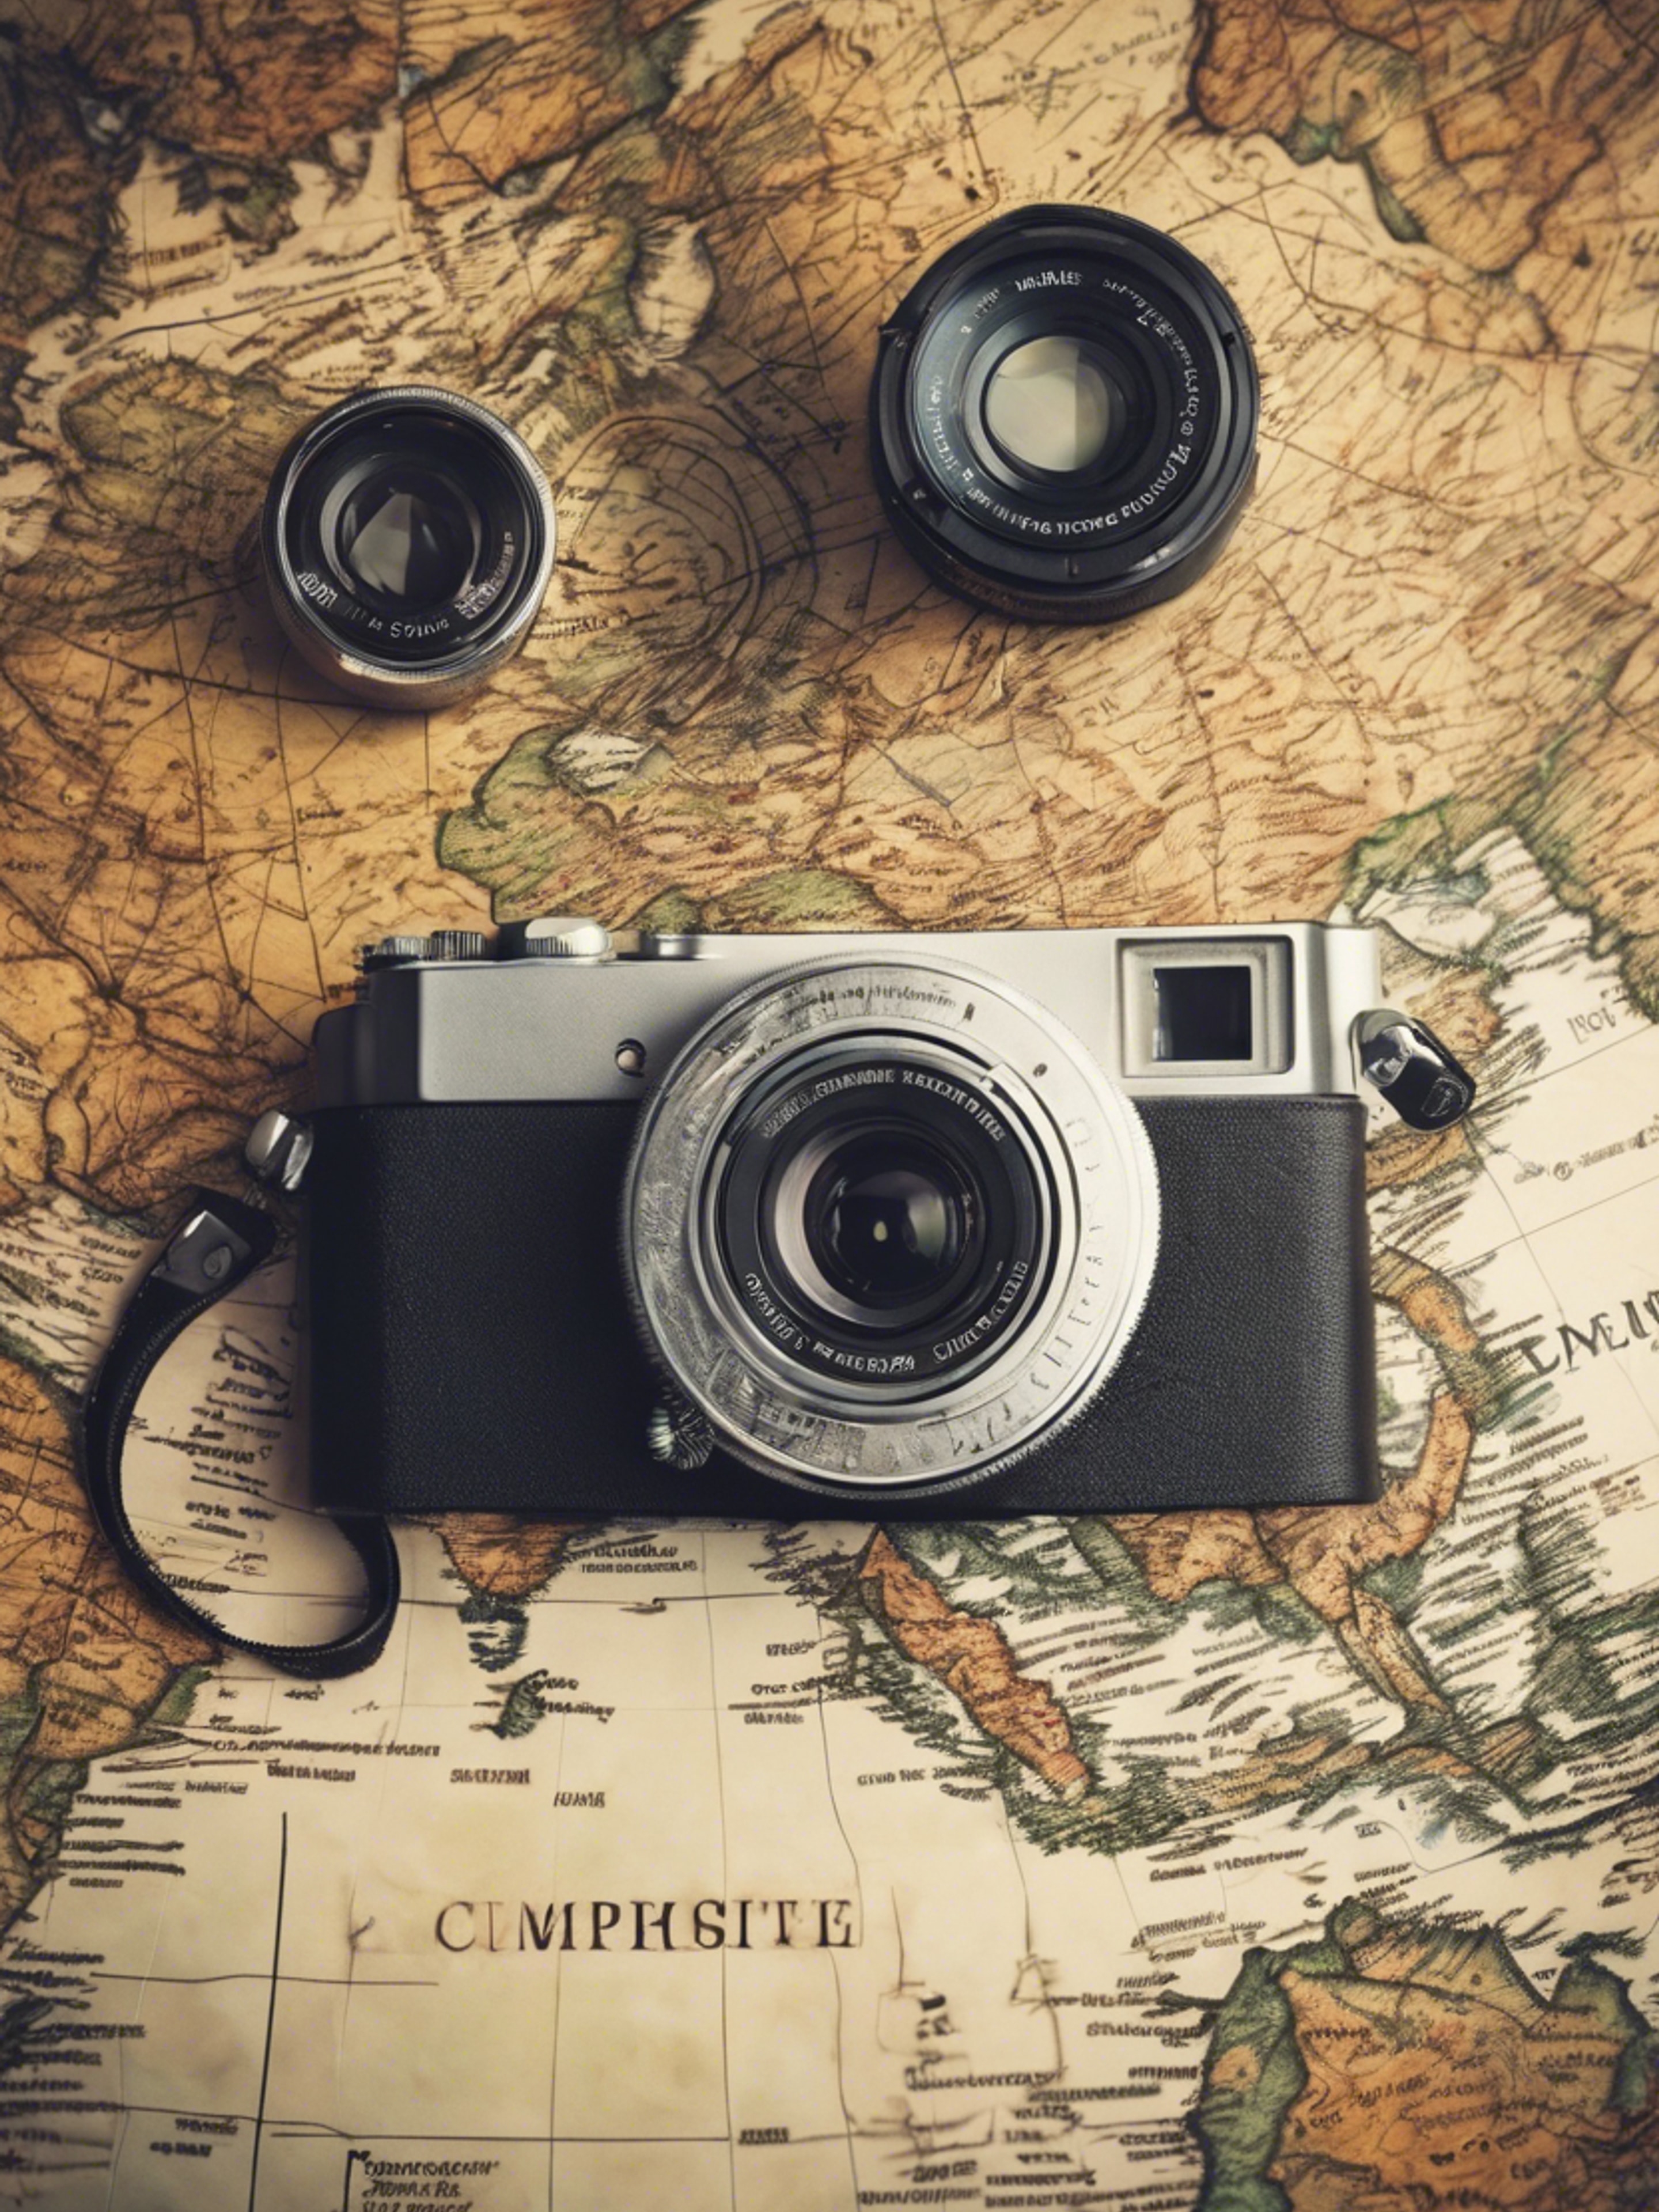 A compact camera with vintage design, placed on a world map to convey the spirit of travel. Wallpaper[89e32525bdc346769ef4]